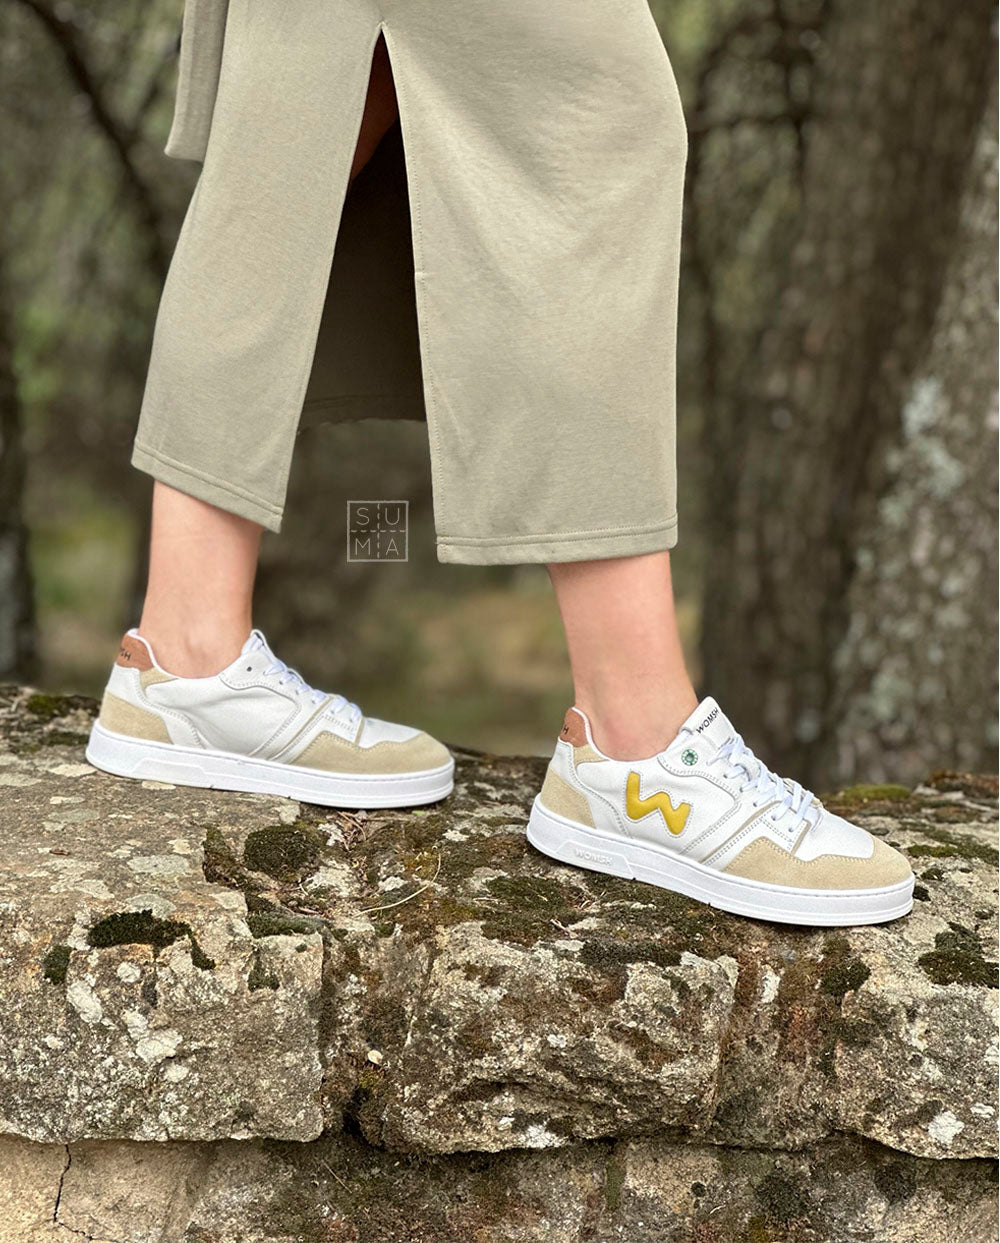 Womsh Sneakers C1012 white sun